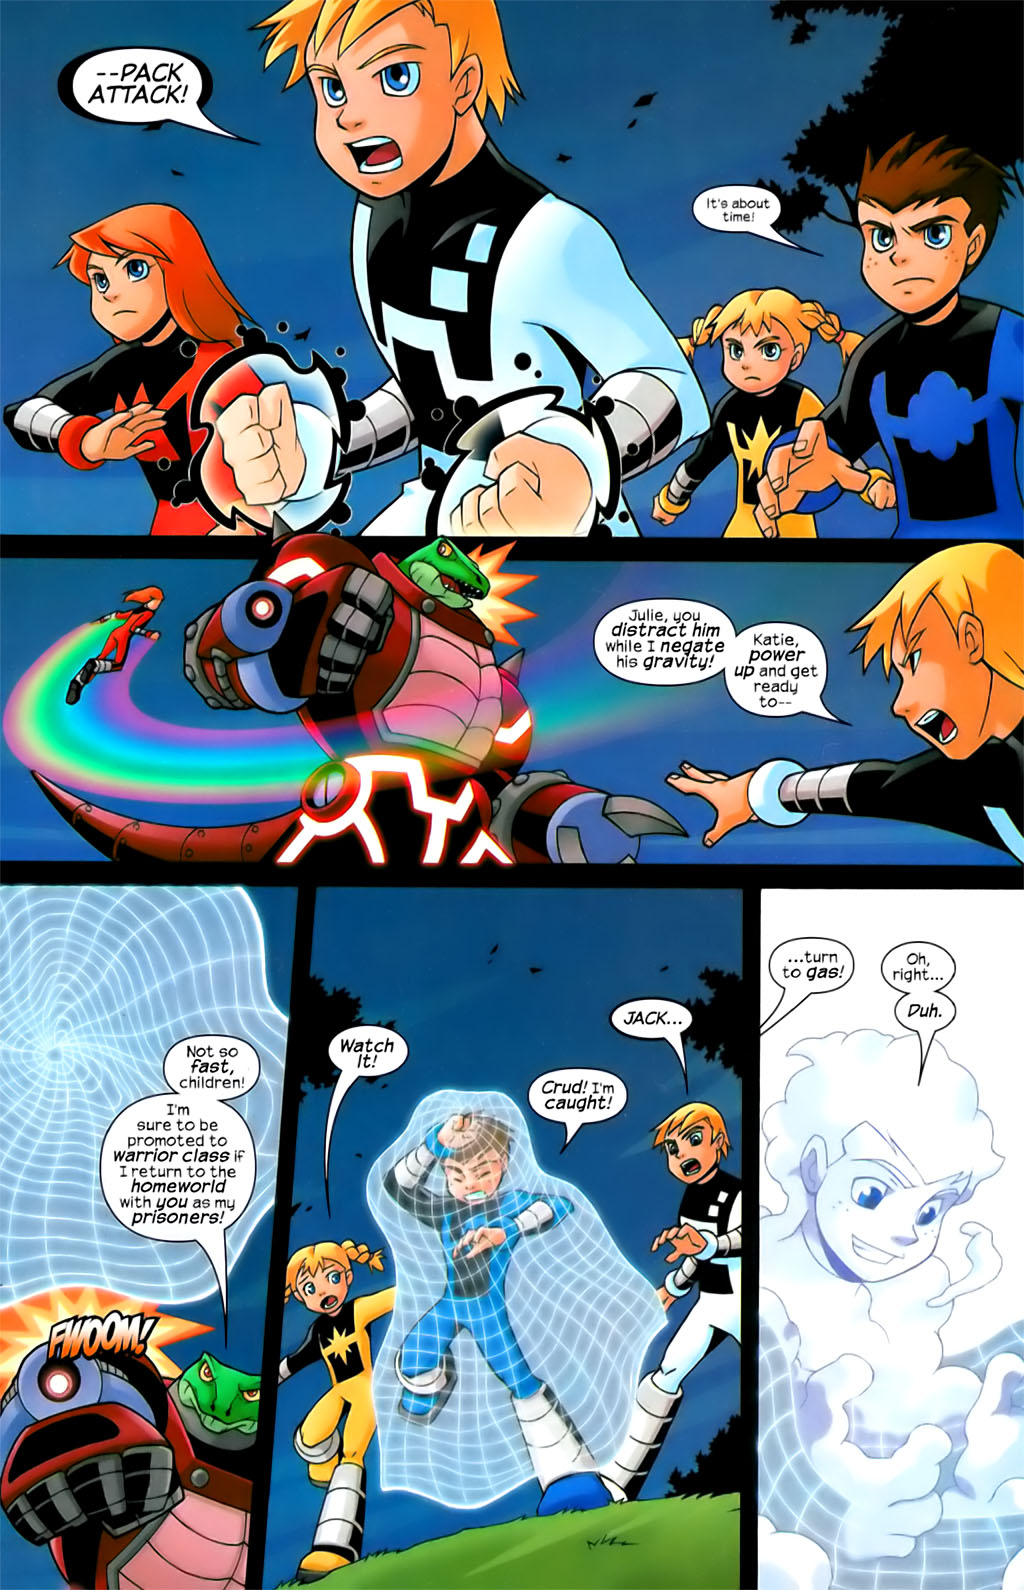 Power Pack 2005 Issue 1 Read Power Pack 2005 Issue 1 Comic Online In 